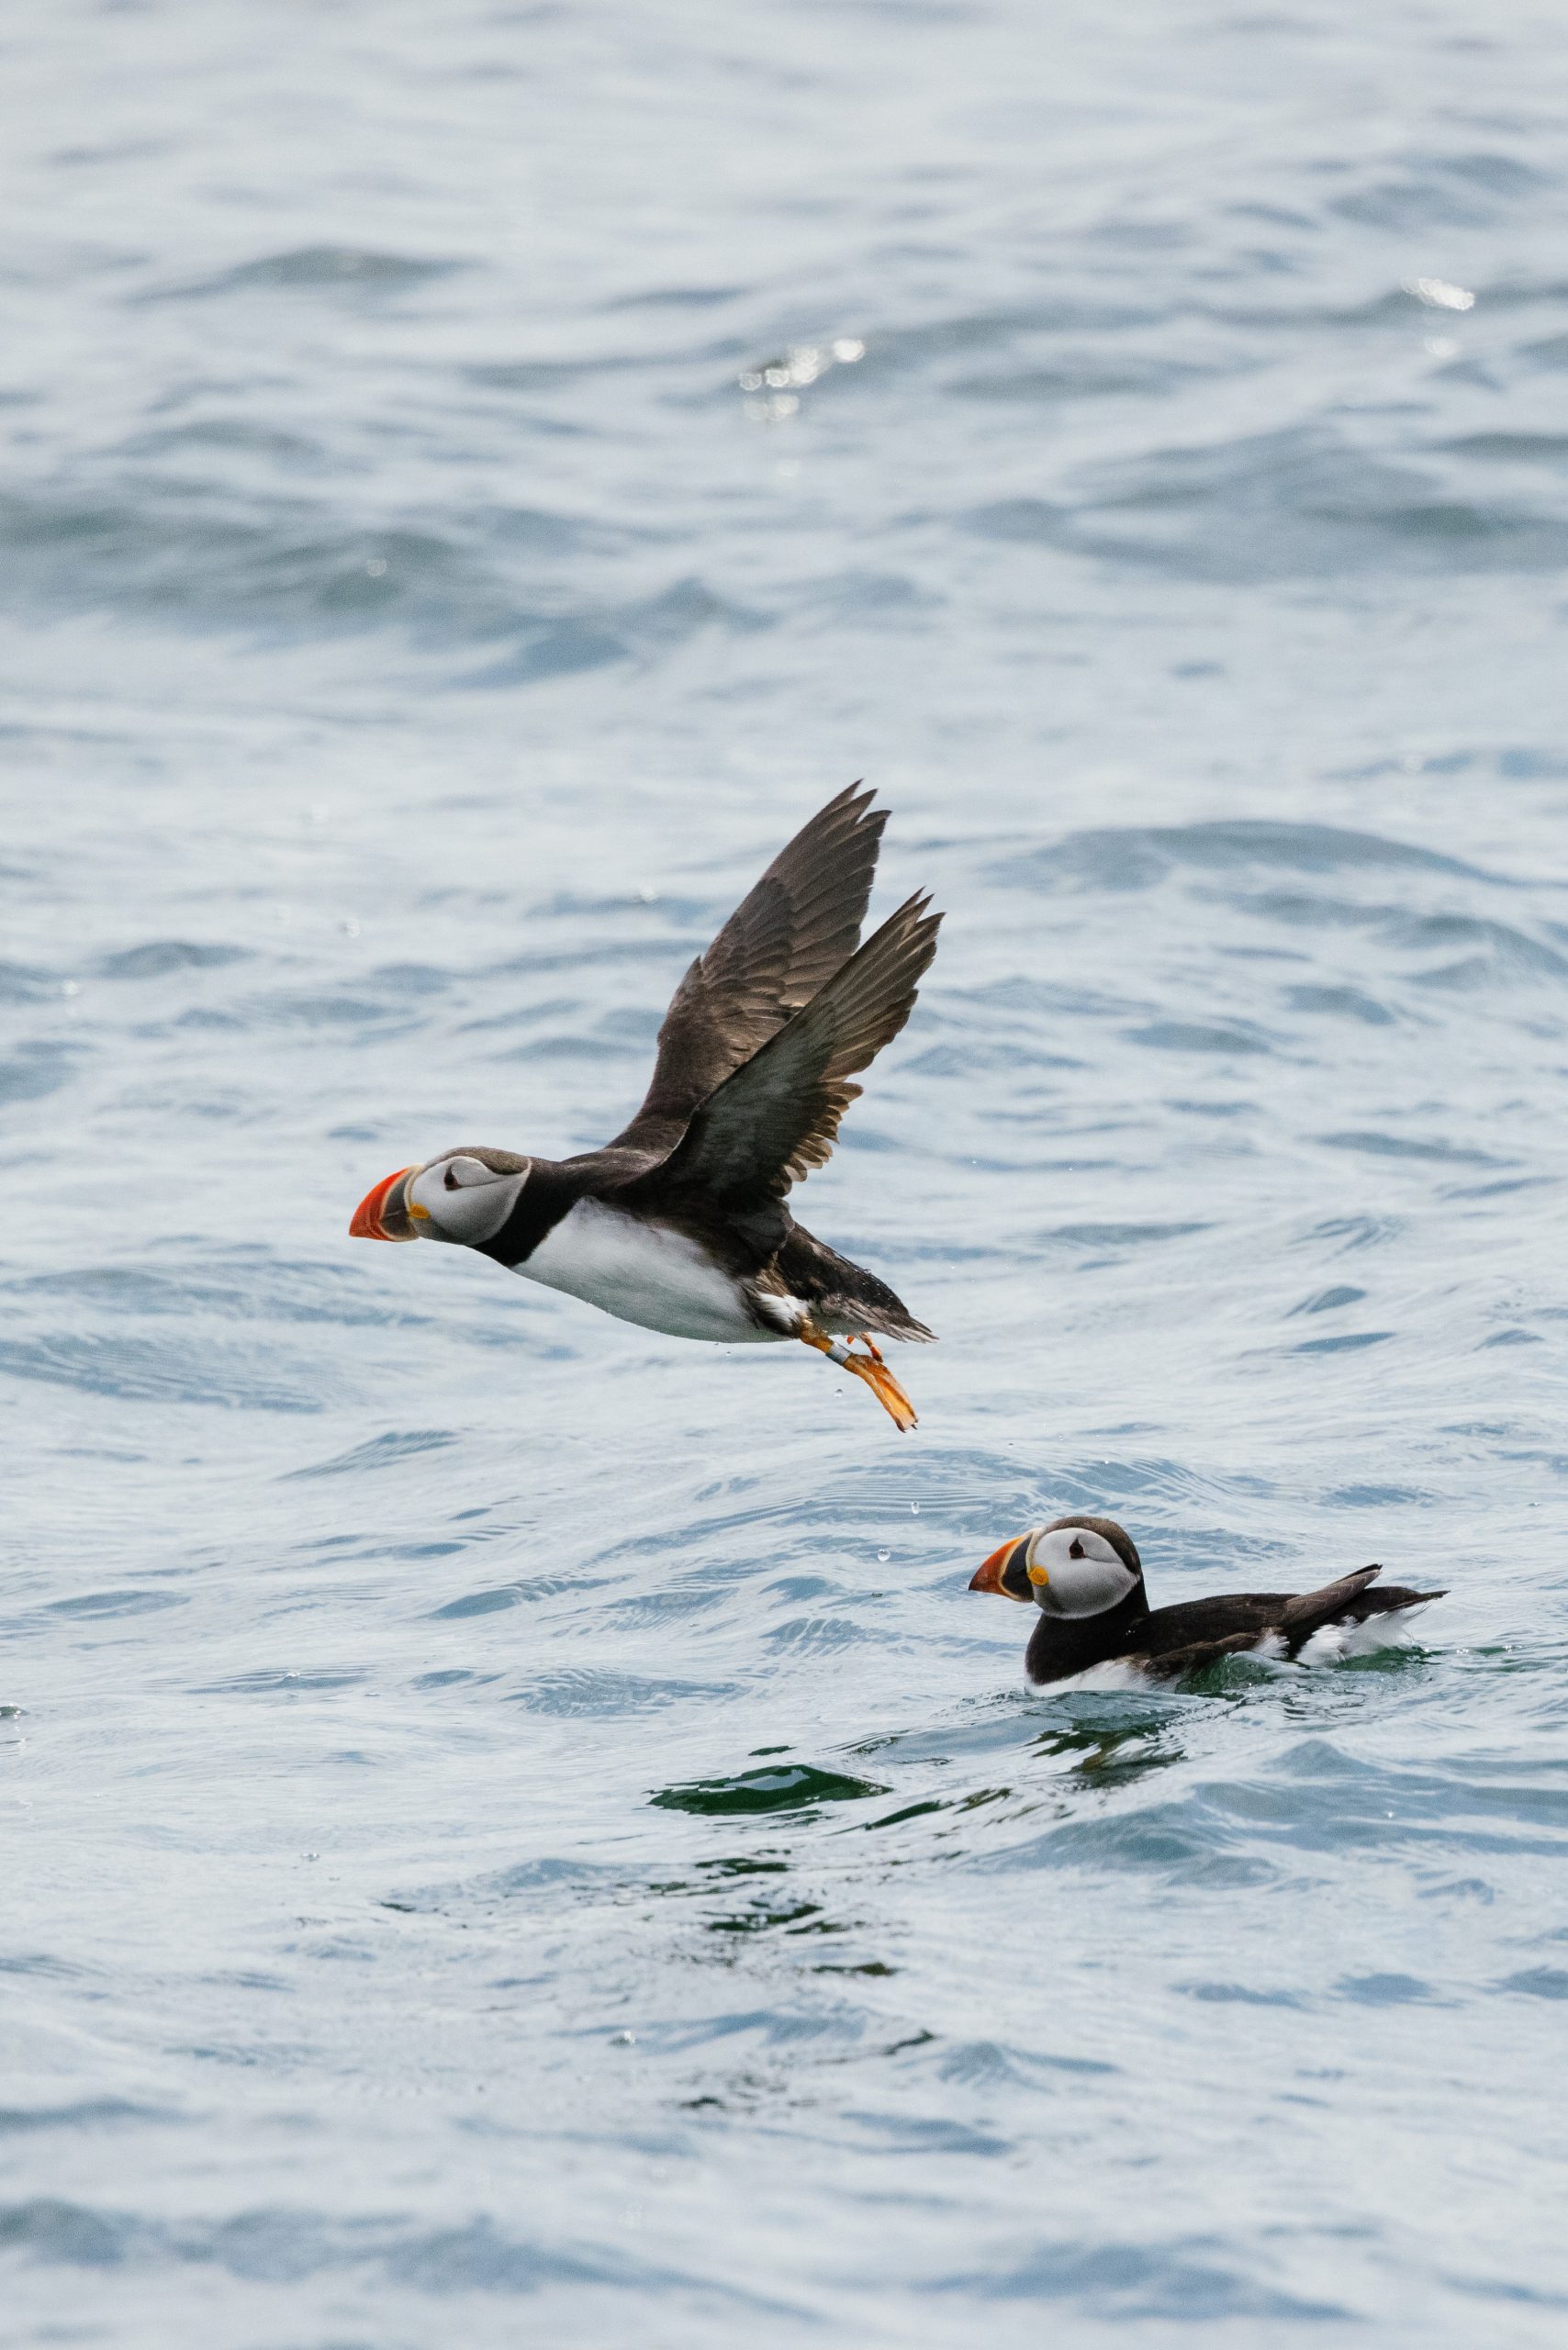 Two puffins in the sea, one flying